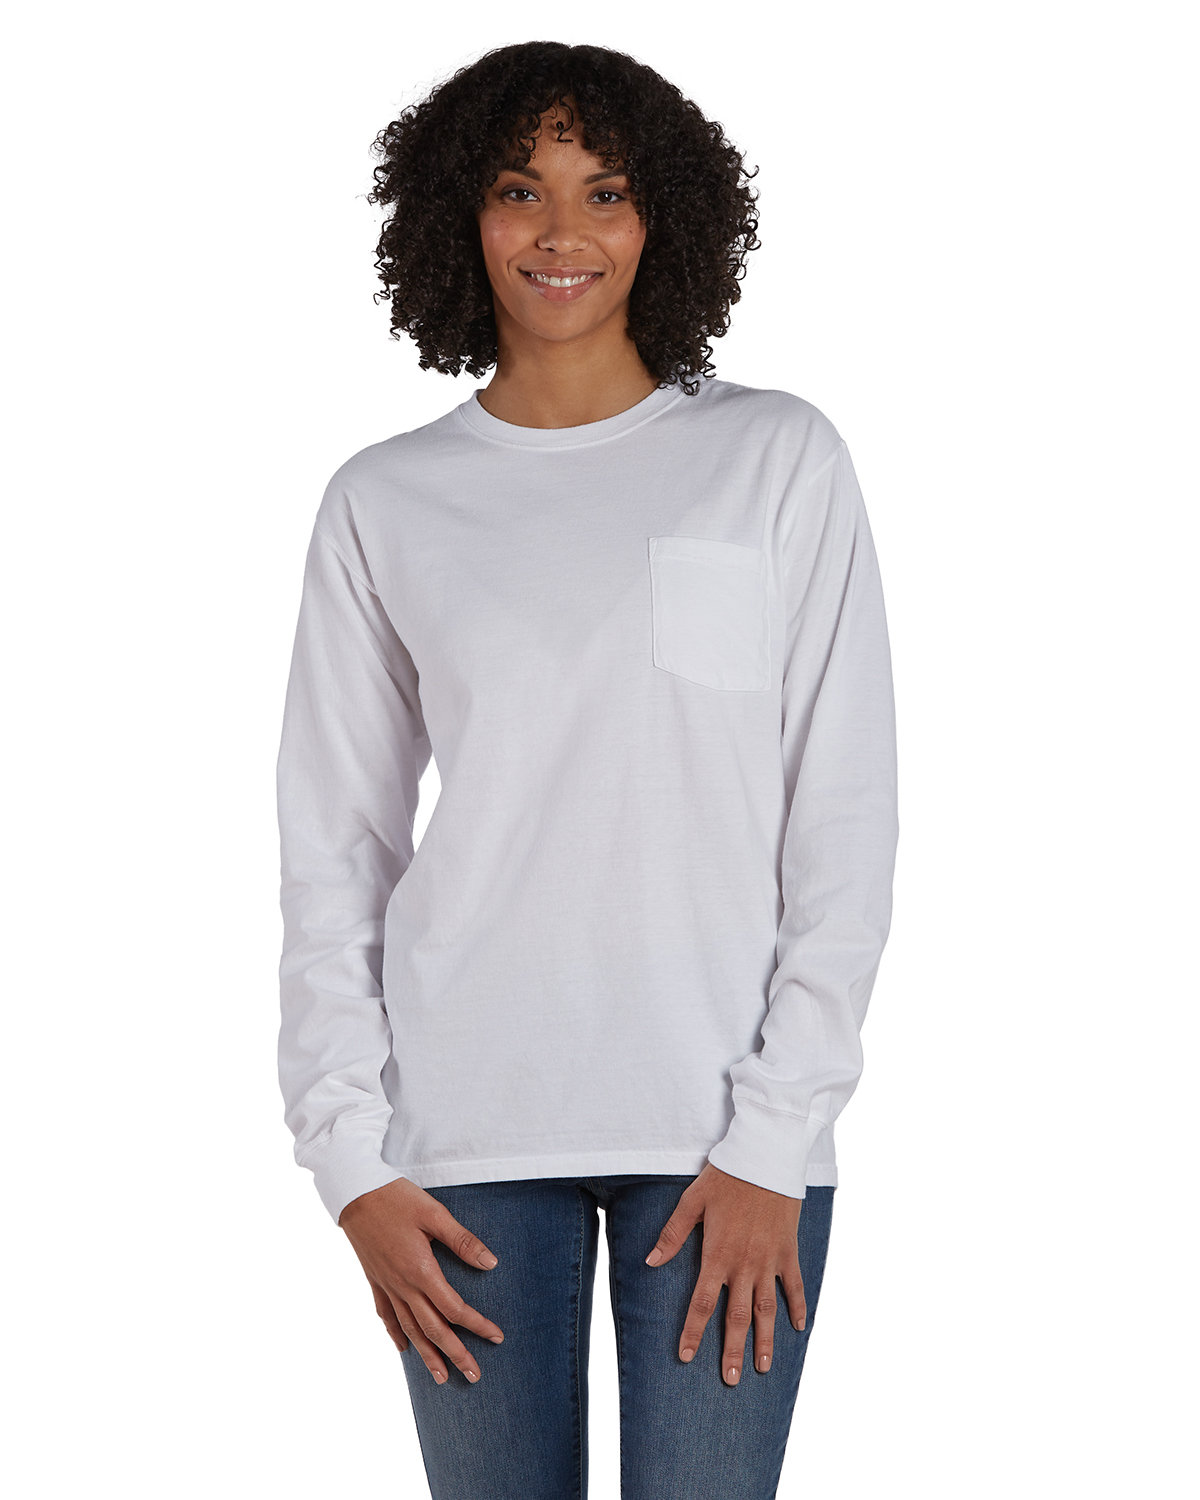 Unisex Garment&#45;Dyed Long&#45;Sleeve T&#45;Shirt With Pocket-ComfortWash by Hanes